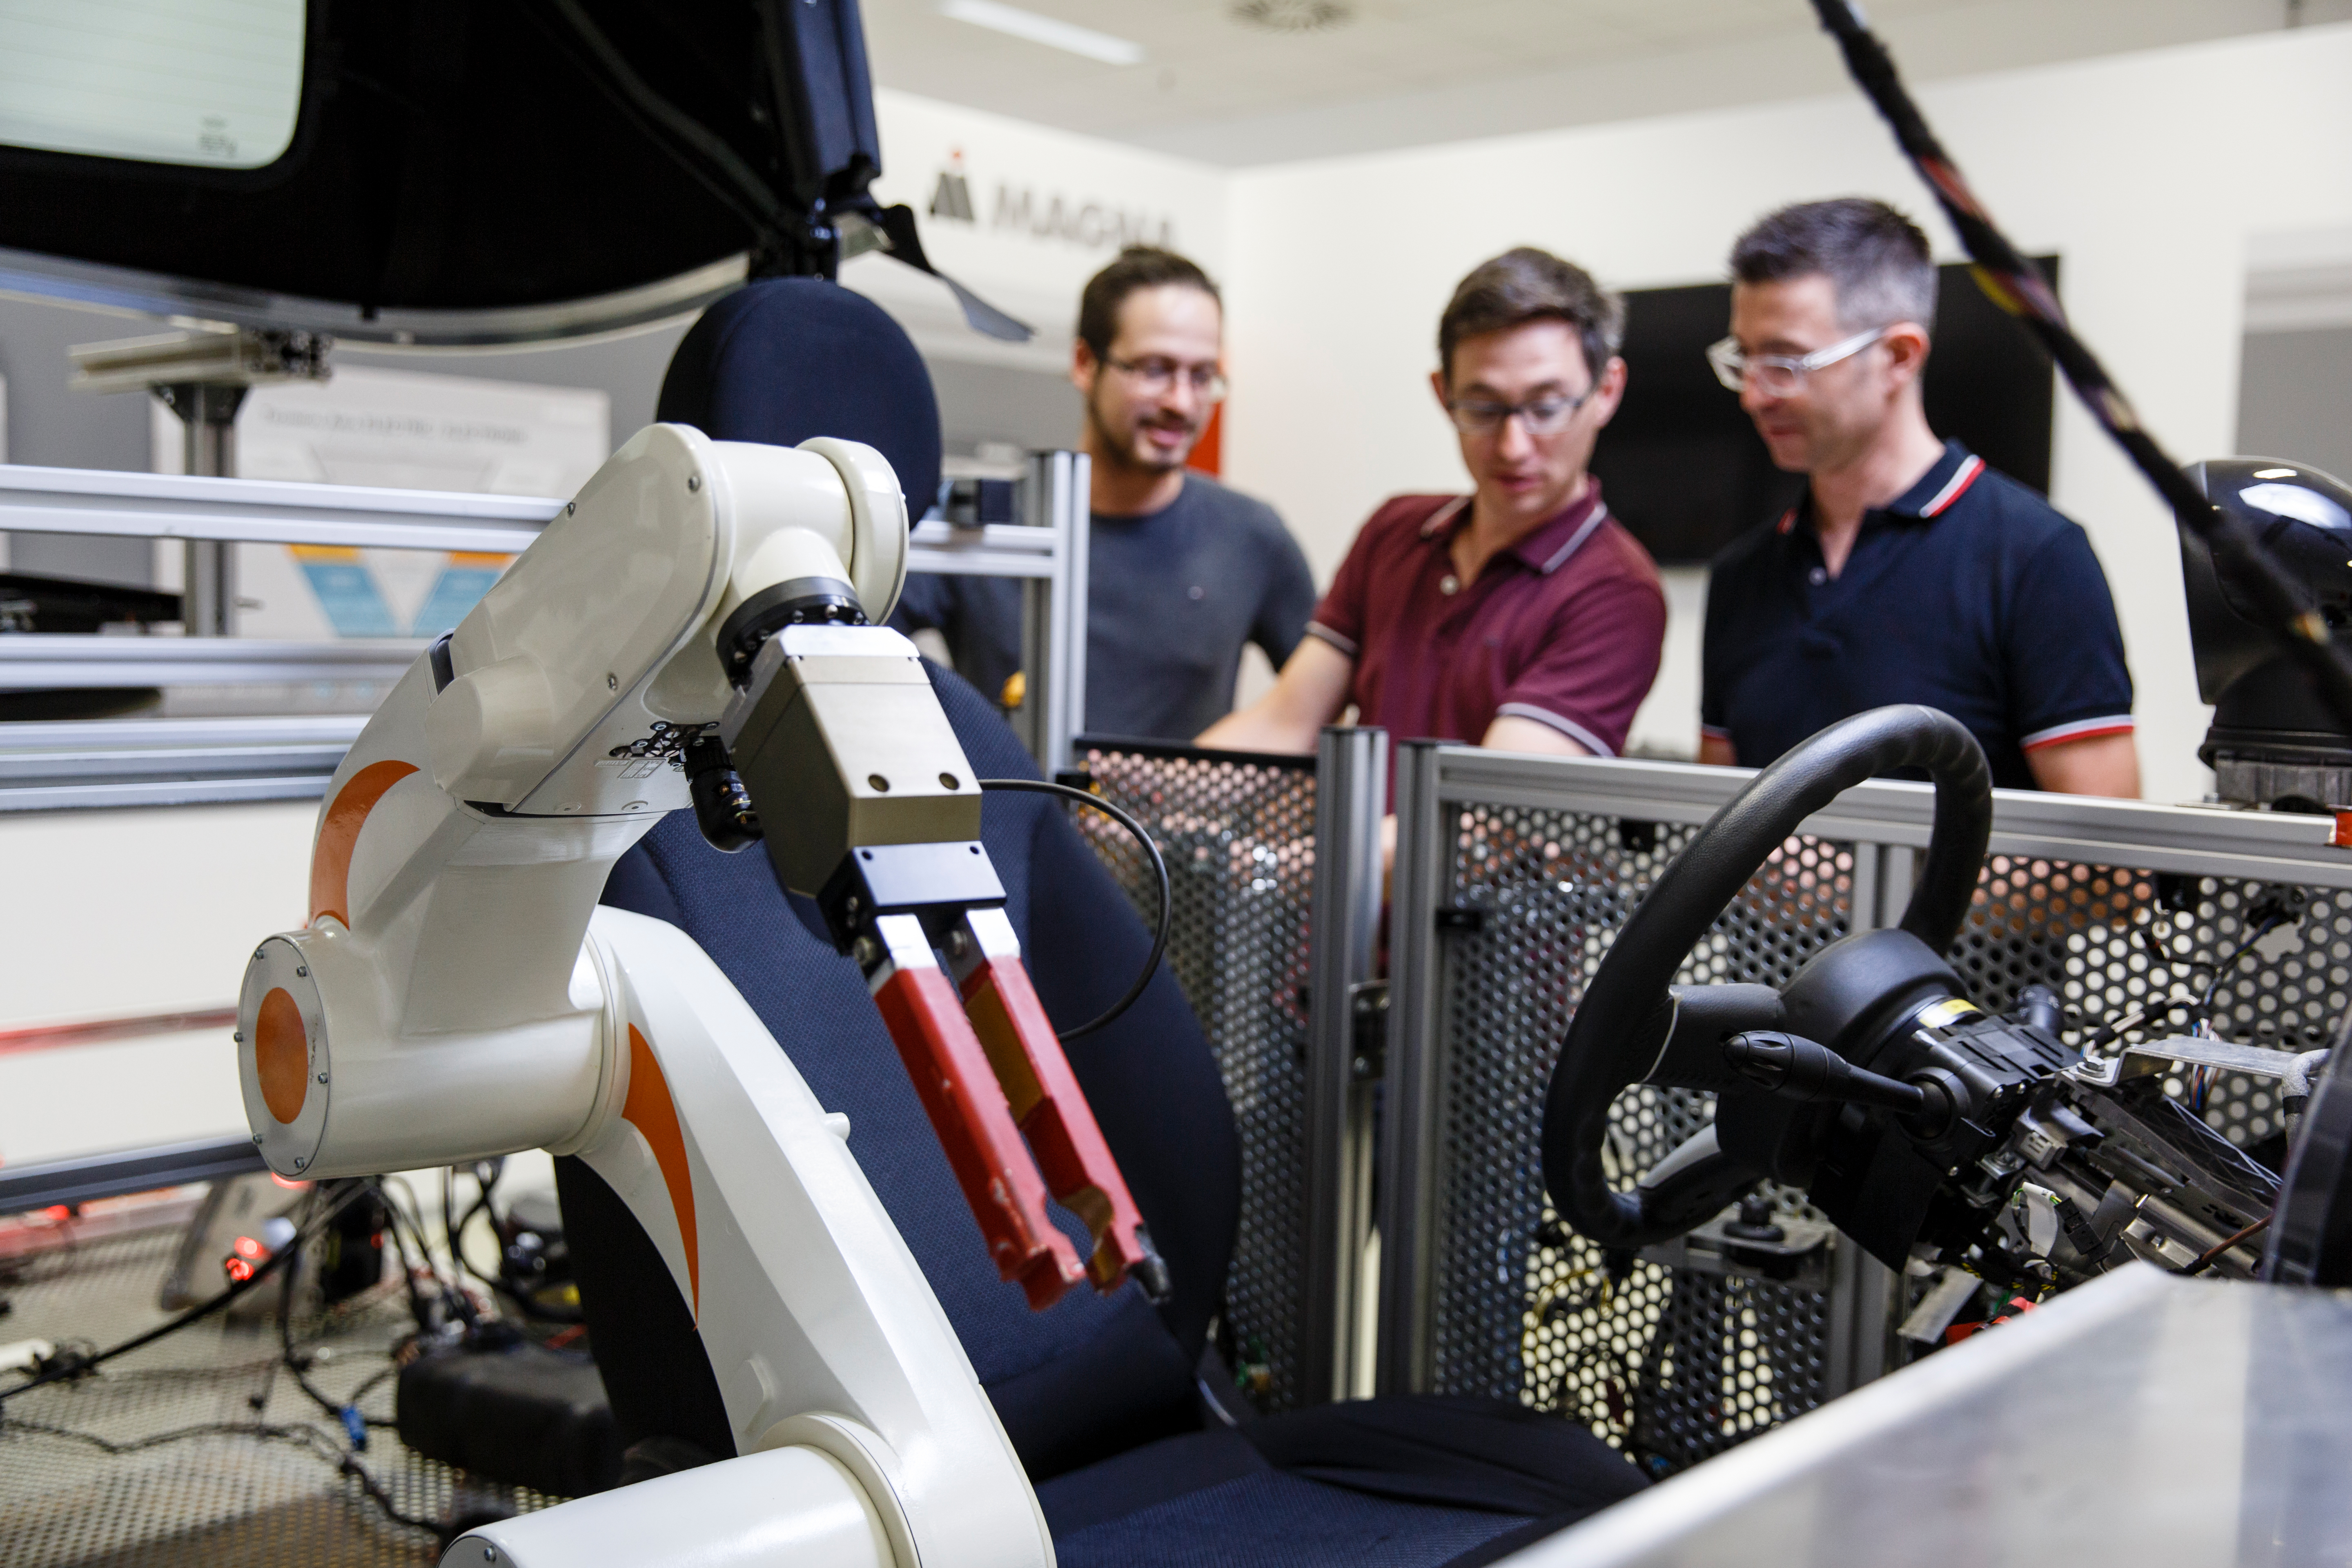 Three Magna engineers look on as robot helps build an automotive machine.